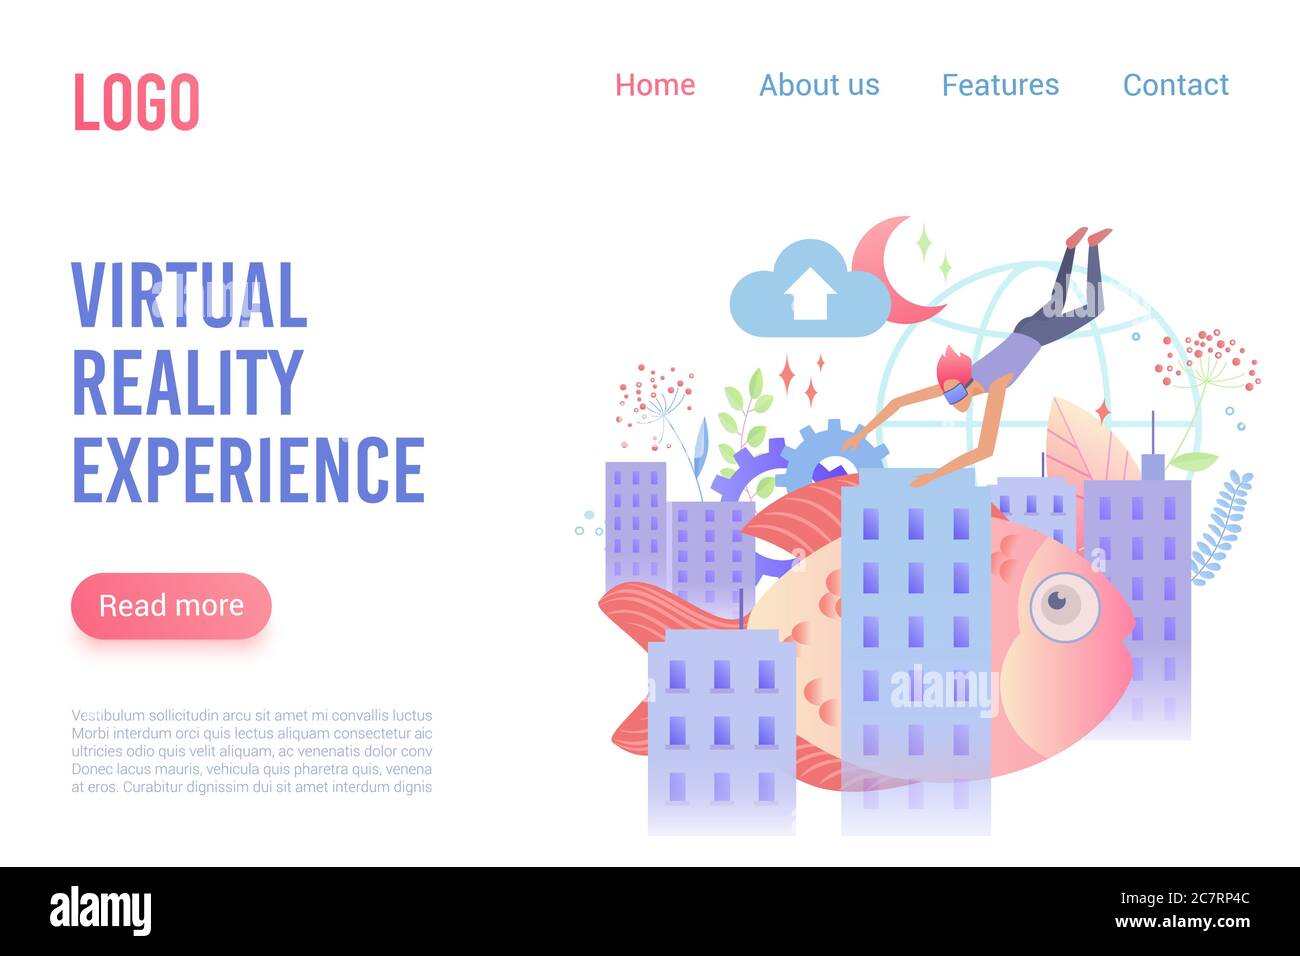 Virtual reality experience flat vector landing page template. Diver in VR glasses enjoying fantasy world cartoon character. Augmented reality entertainment options promo website page design layout. Stock Vector